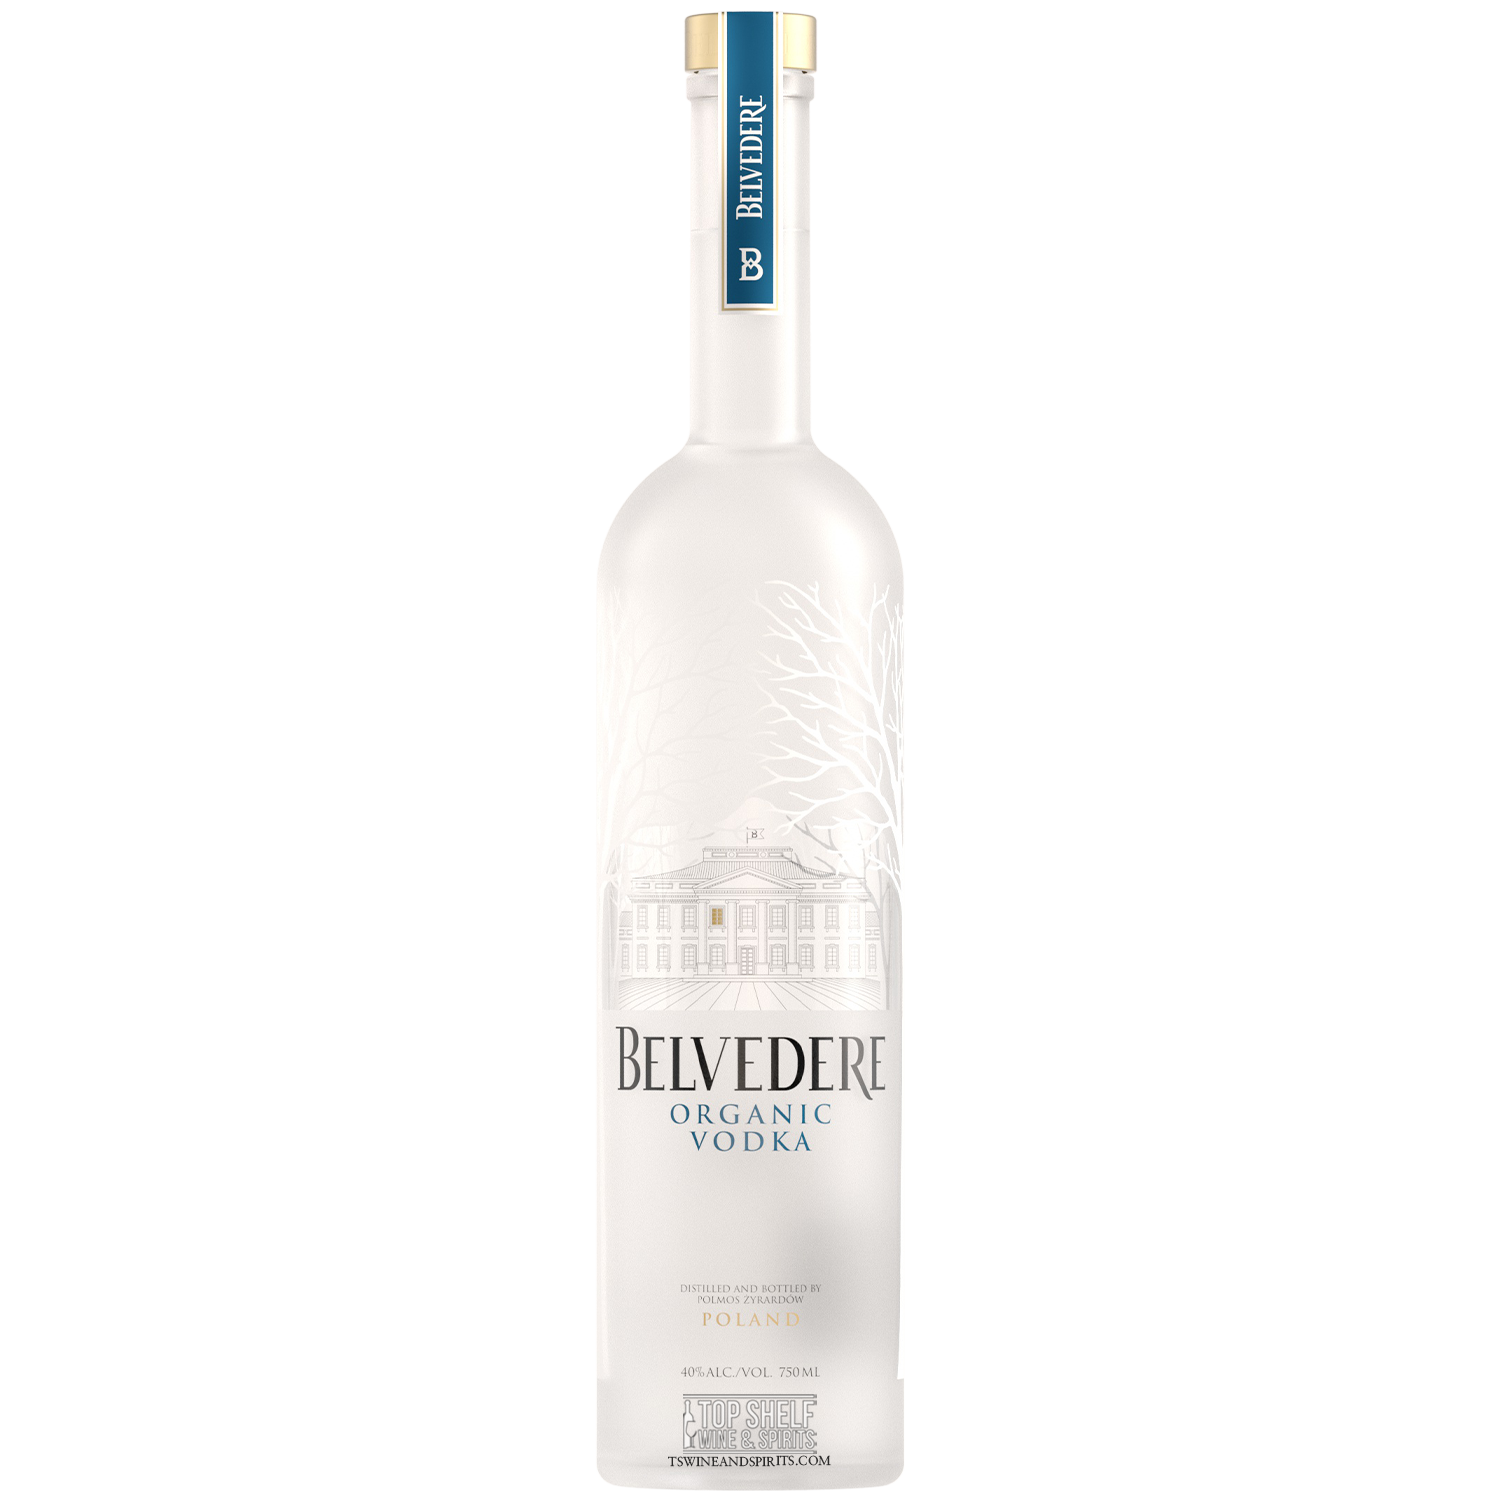 Gifting Organic & Available) Delivery Vodka| (Engraving Belvedere